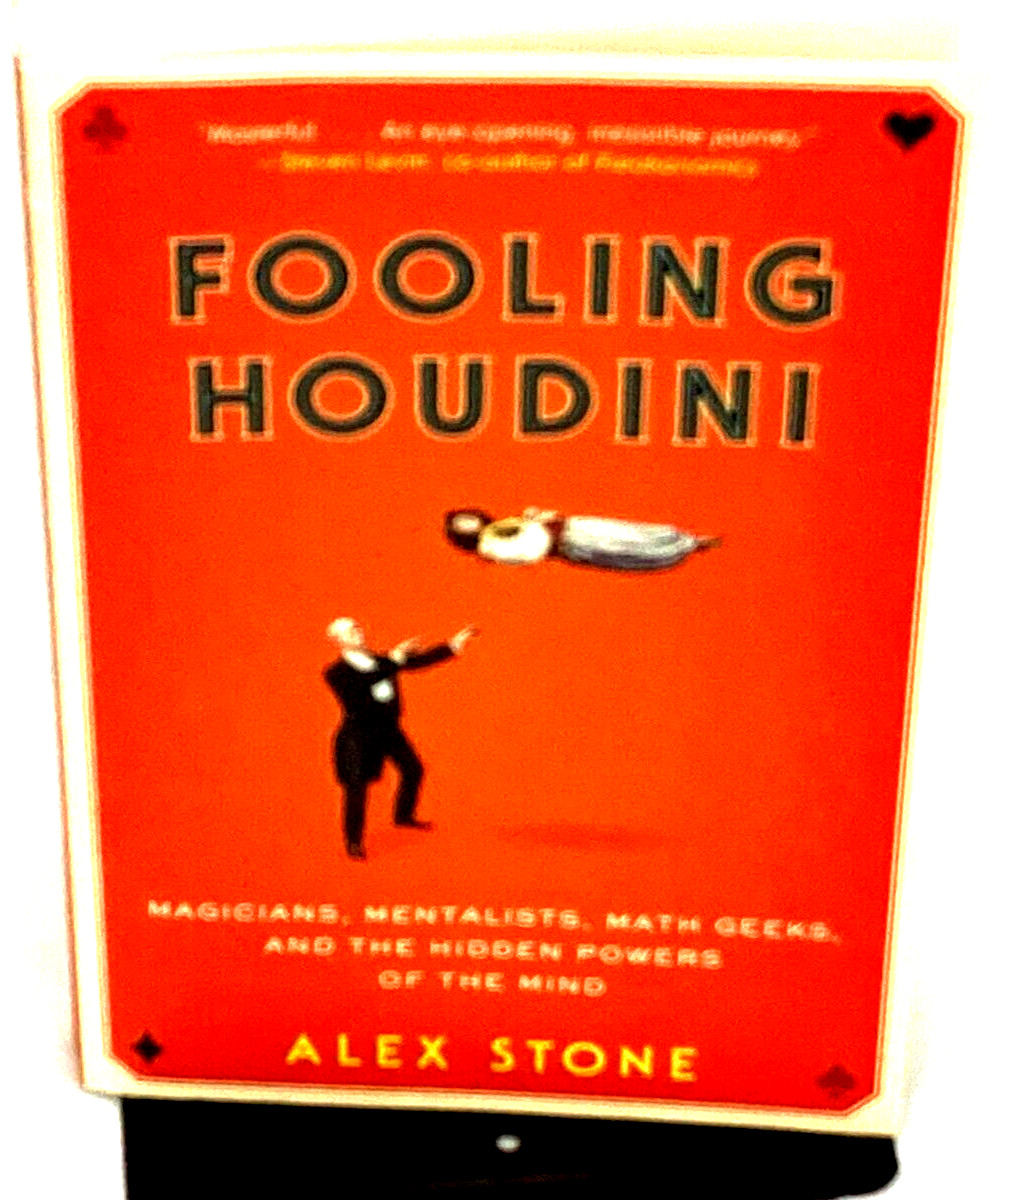 Preowned   FOOLING HOUDINI, ALEX STONE, PAPERBACK, VERY GOOD CONDITION